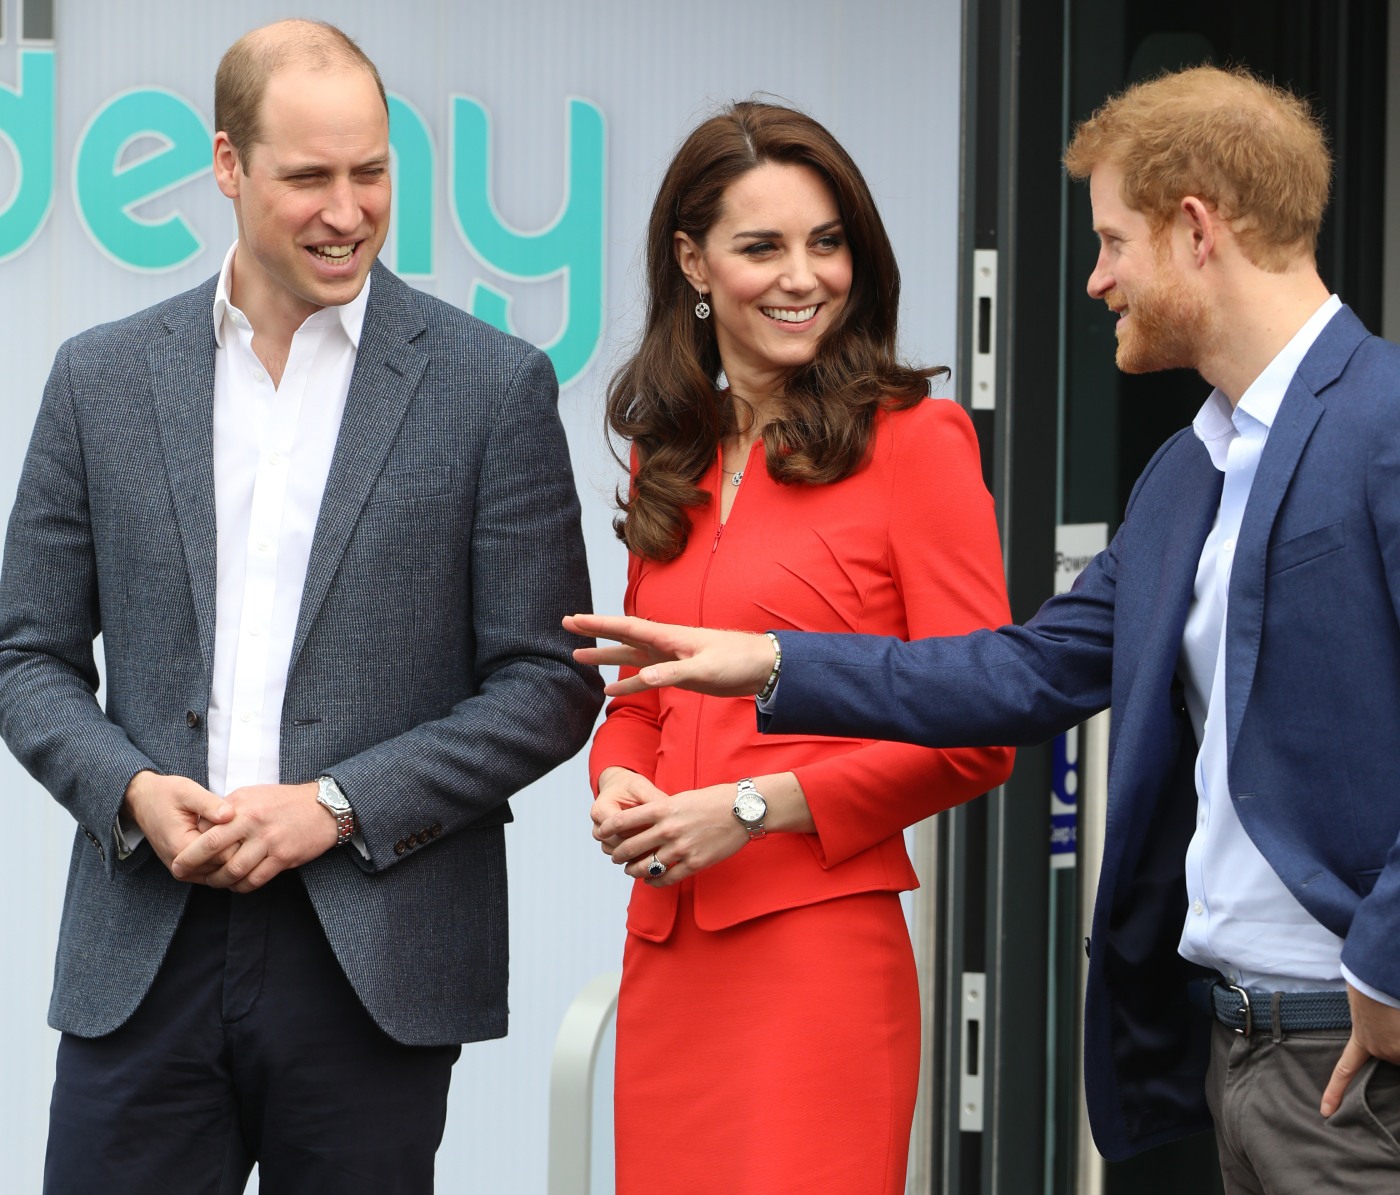 The Duke and Duchess of Cambridge and Prince Harry officially open The Global Academy in support of Heads Together